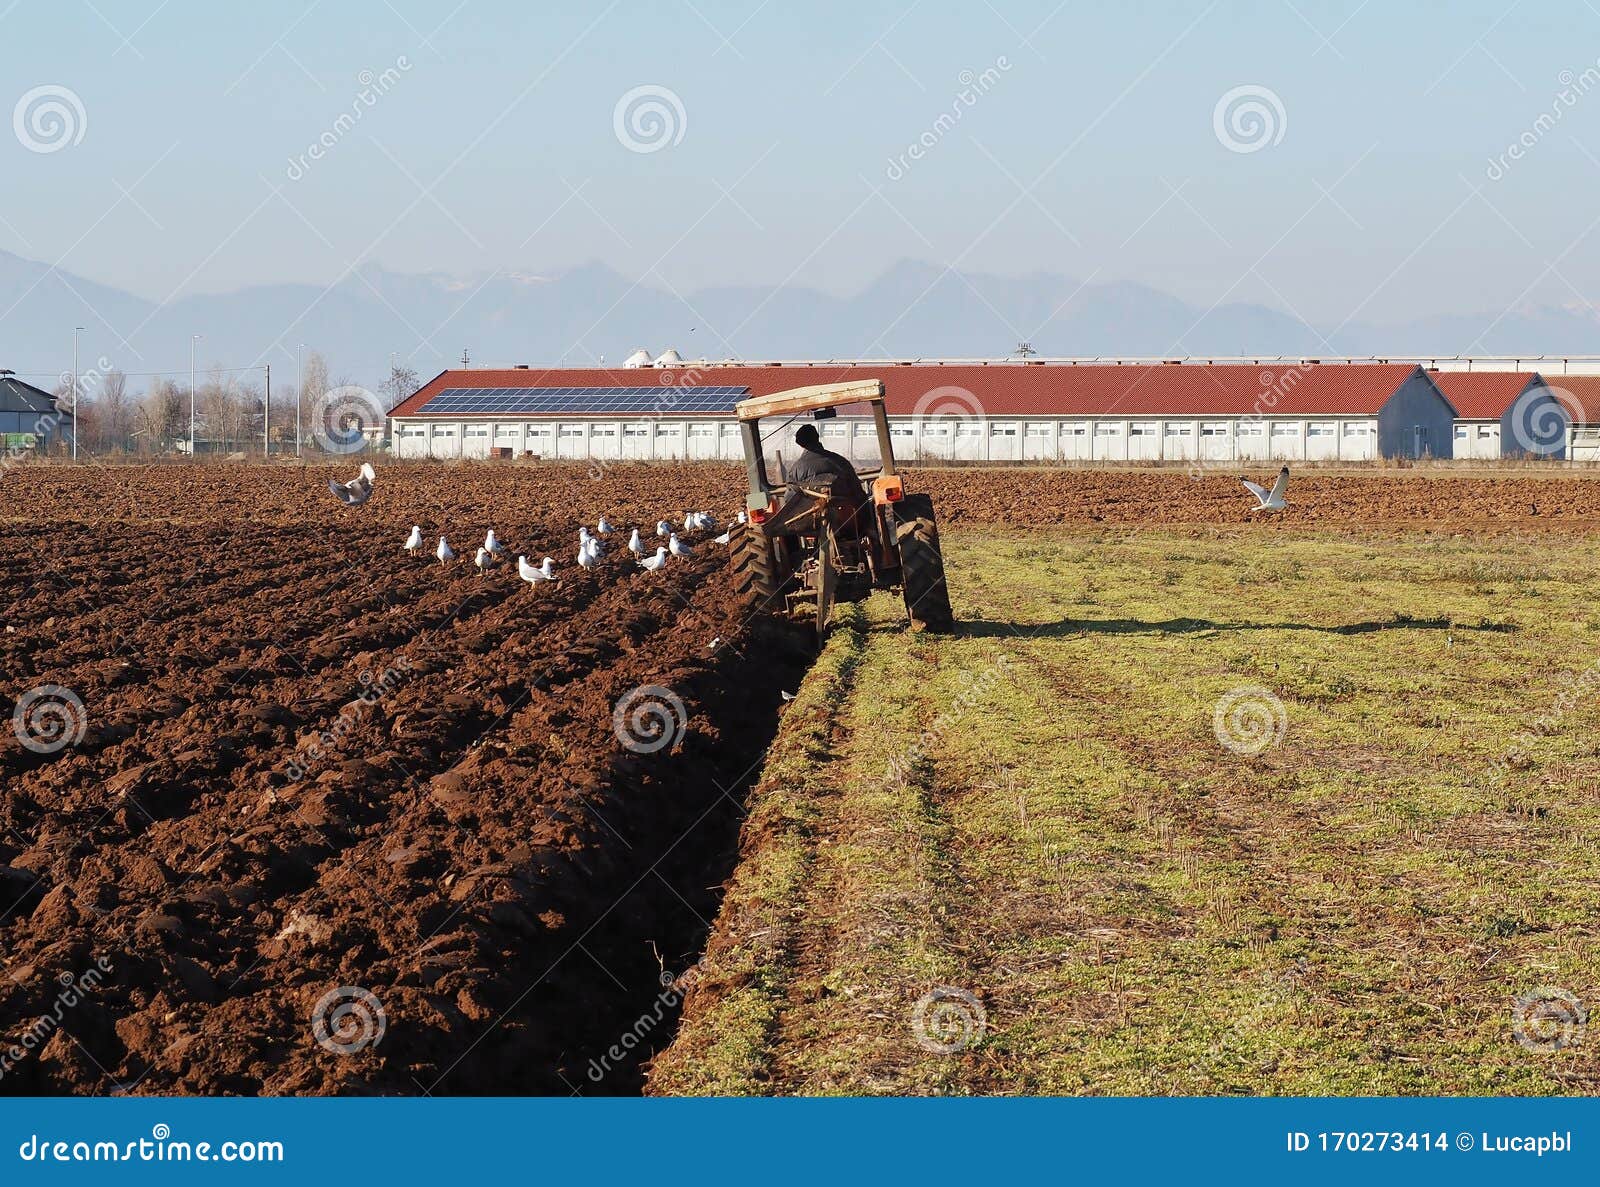 tractor plows the field in front of some agricultural buildings